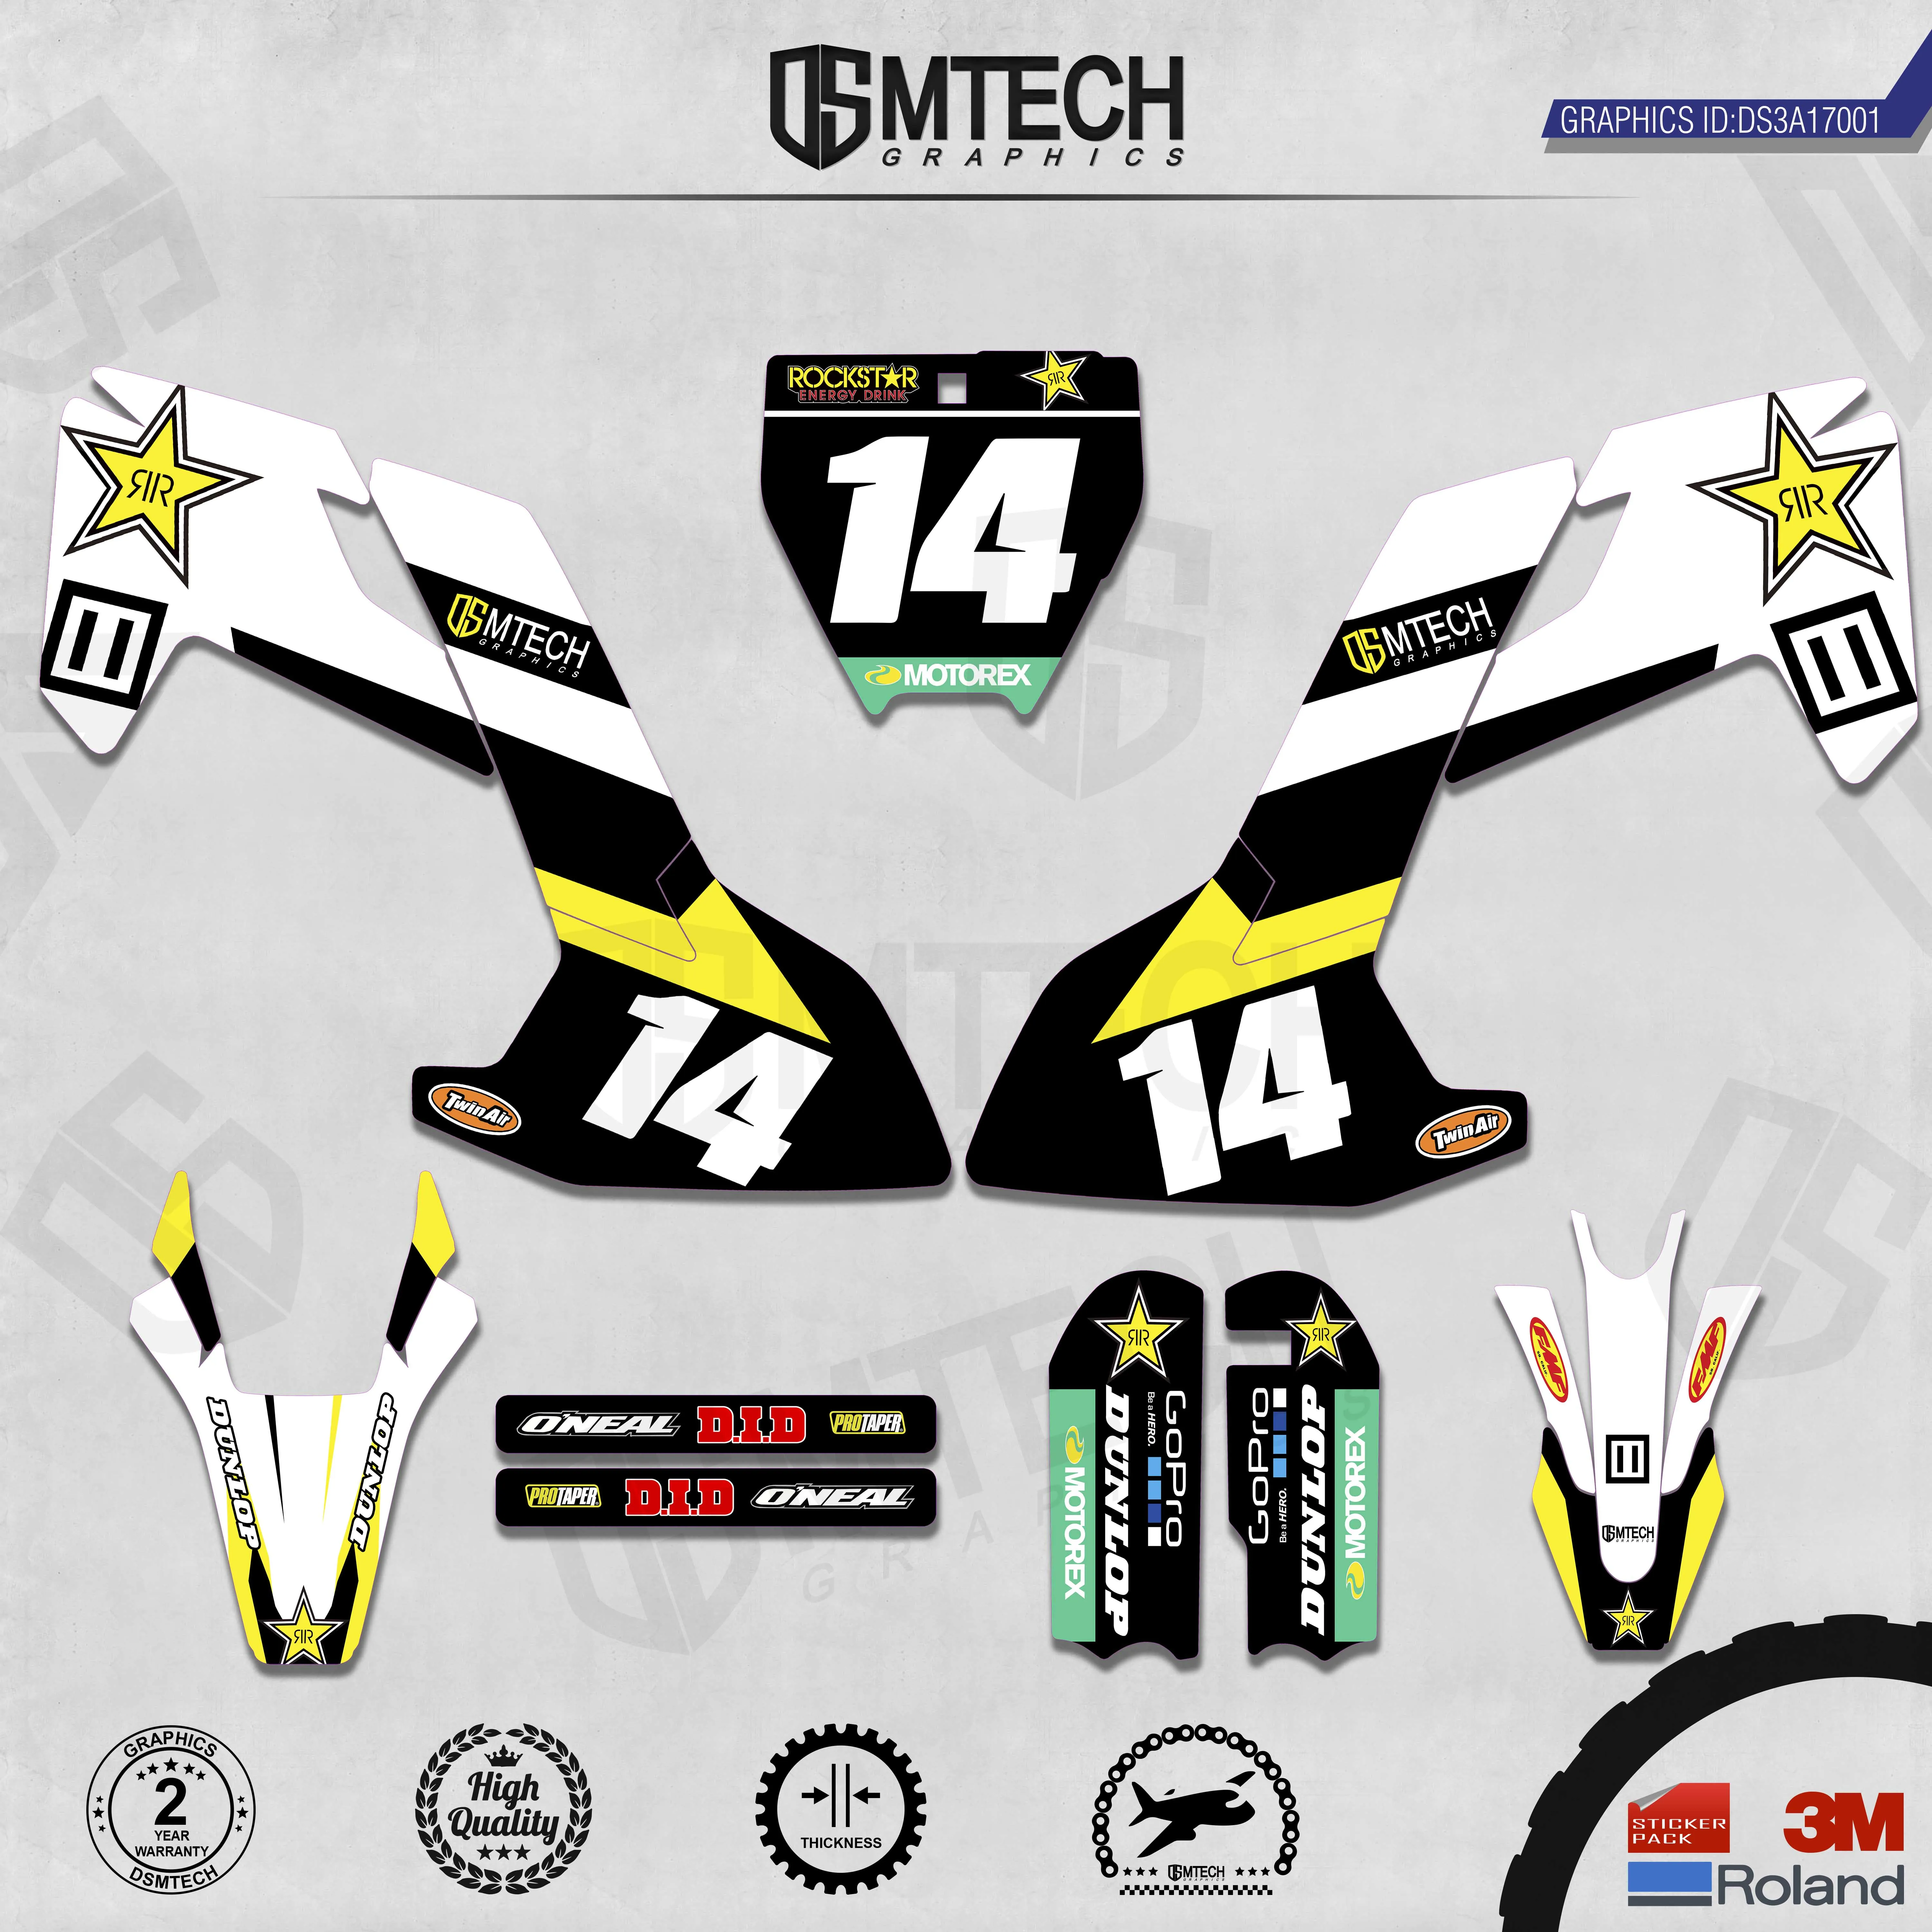 DSMTECH Customized Team Graphics Backgrounds Decals 3M Custom Stickers For 2017 2018 2019 2020 TC50 001